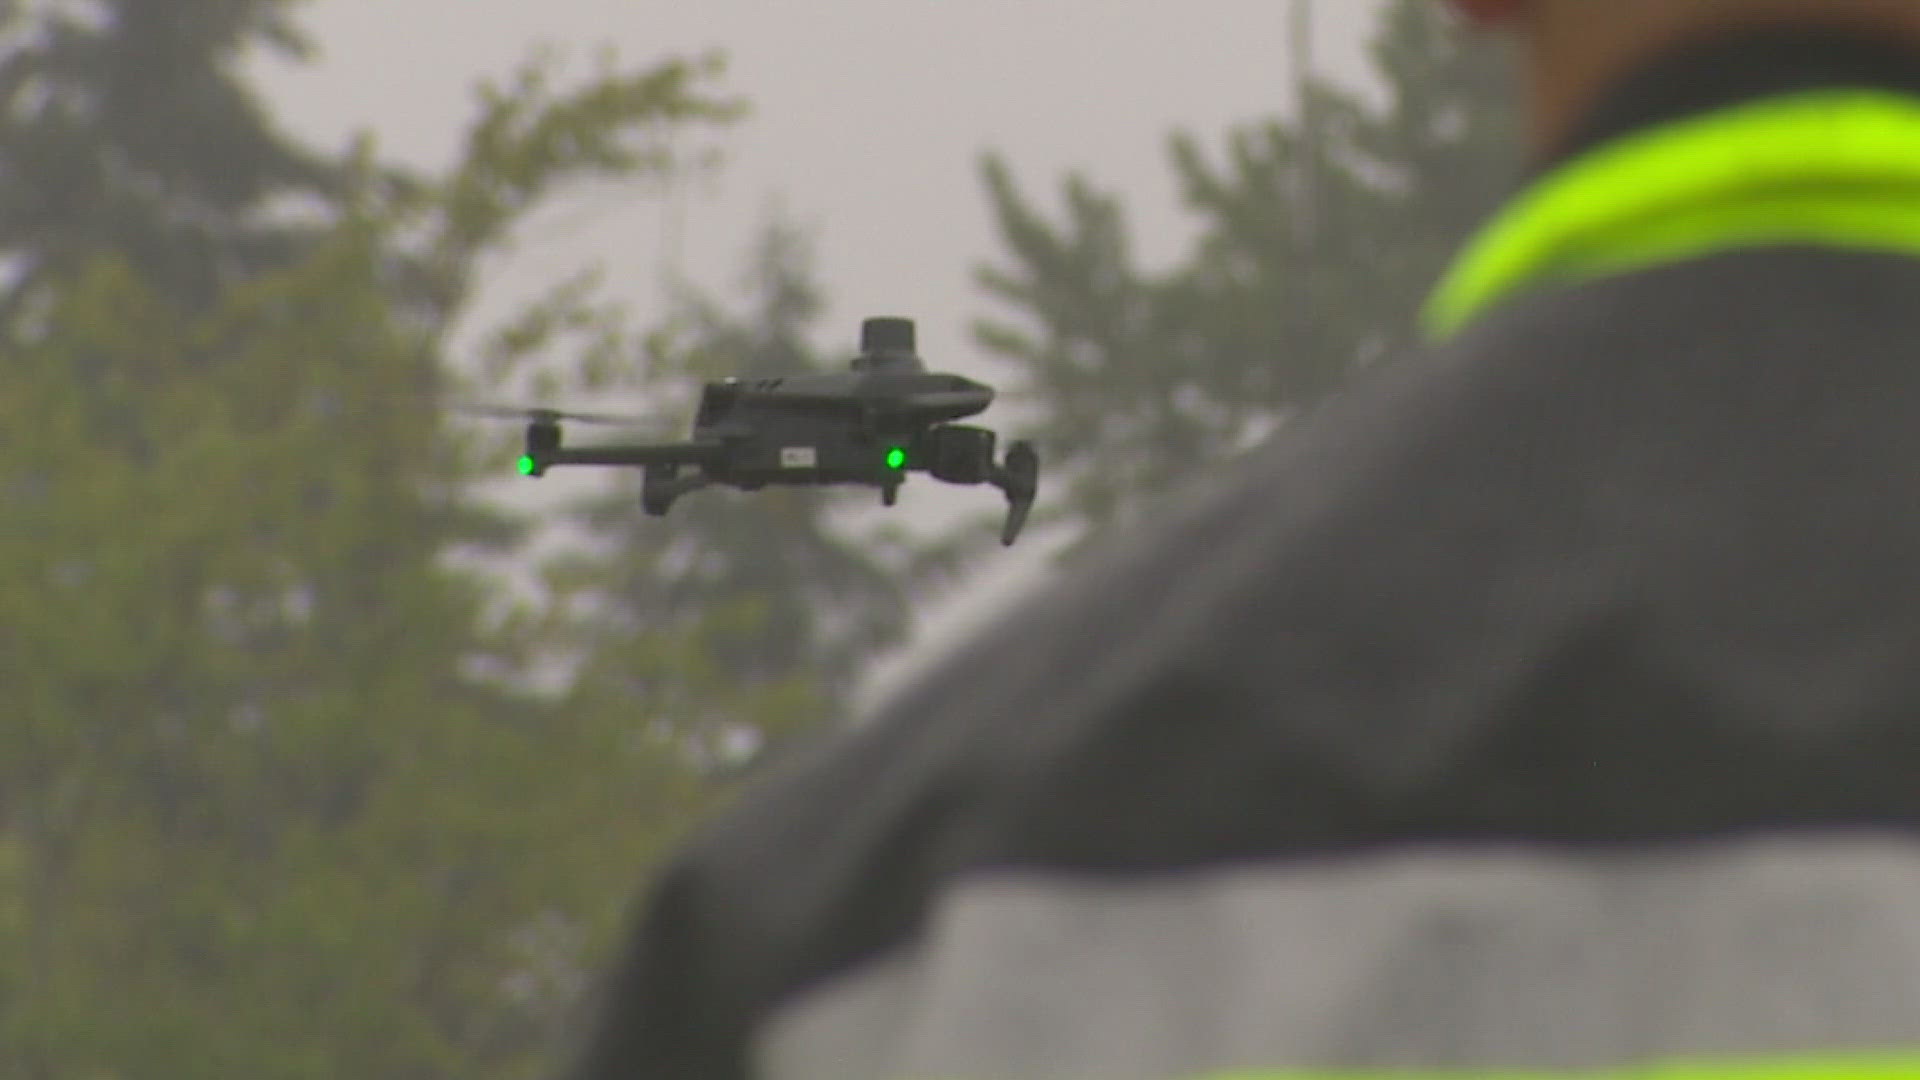 Renton police have more than 30 drones and two dozen FAA-licensed drone pilots.